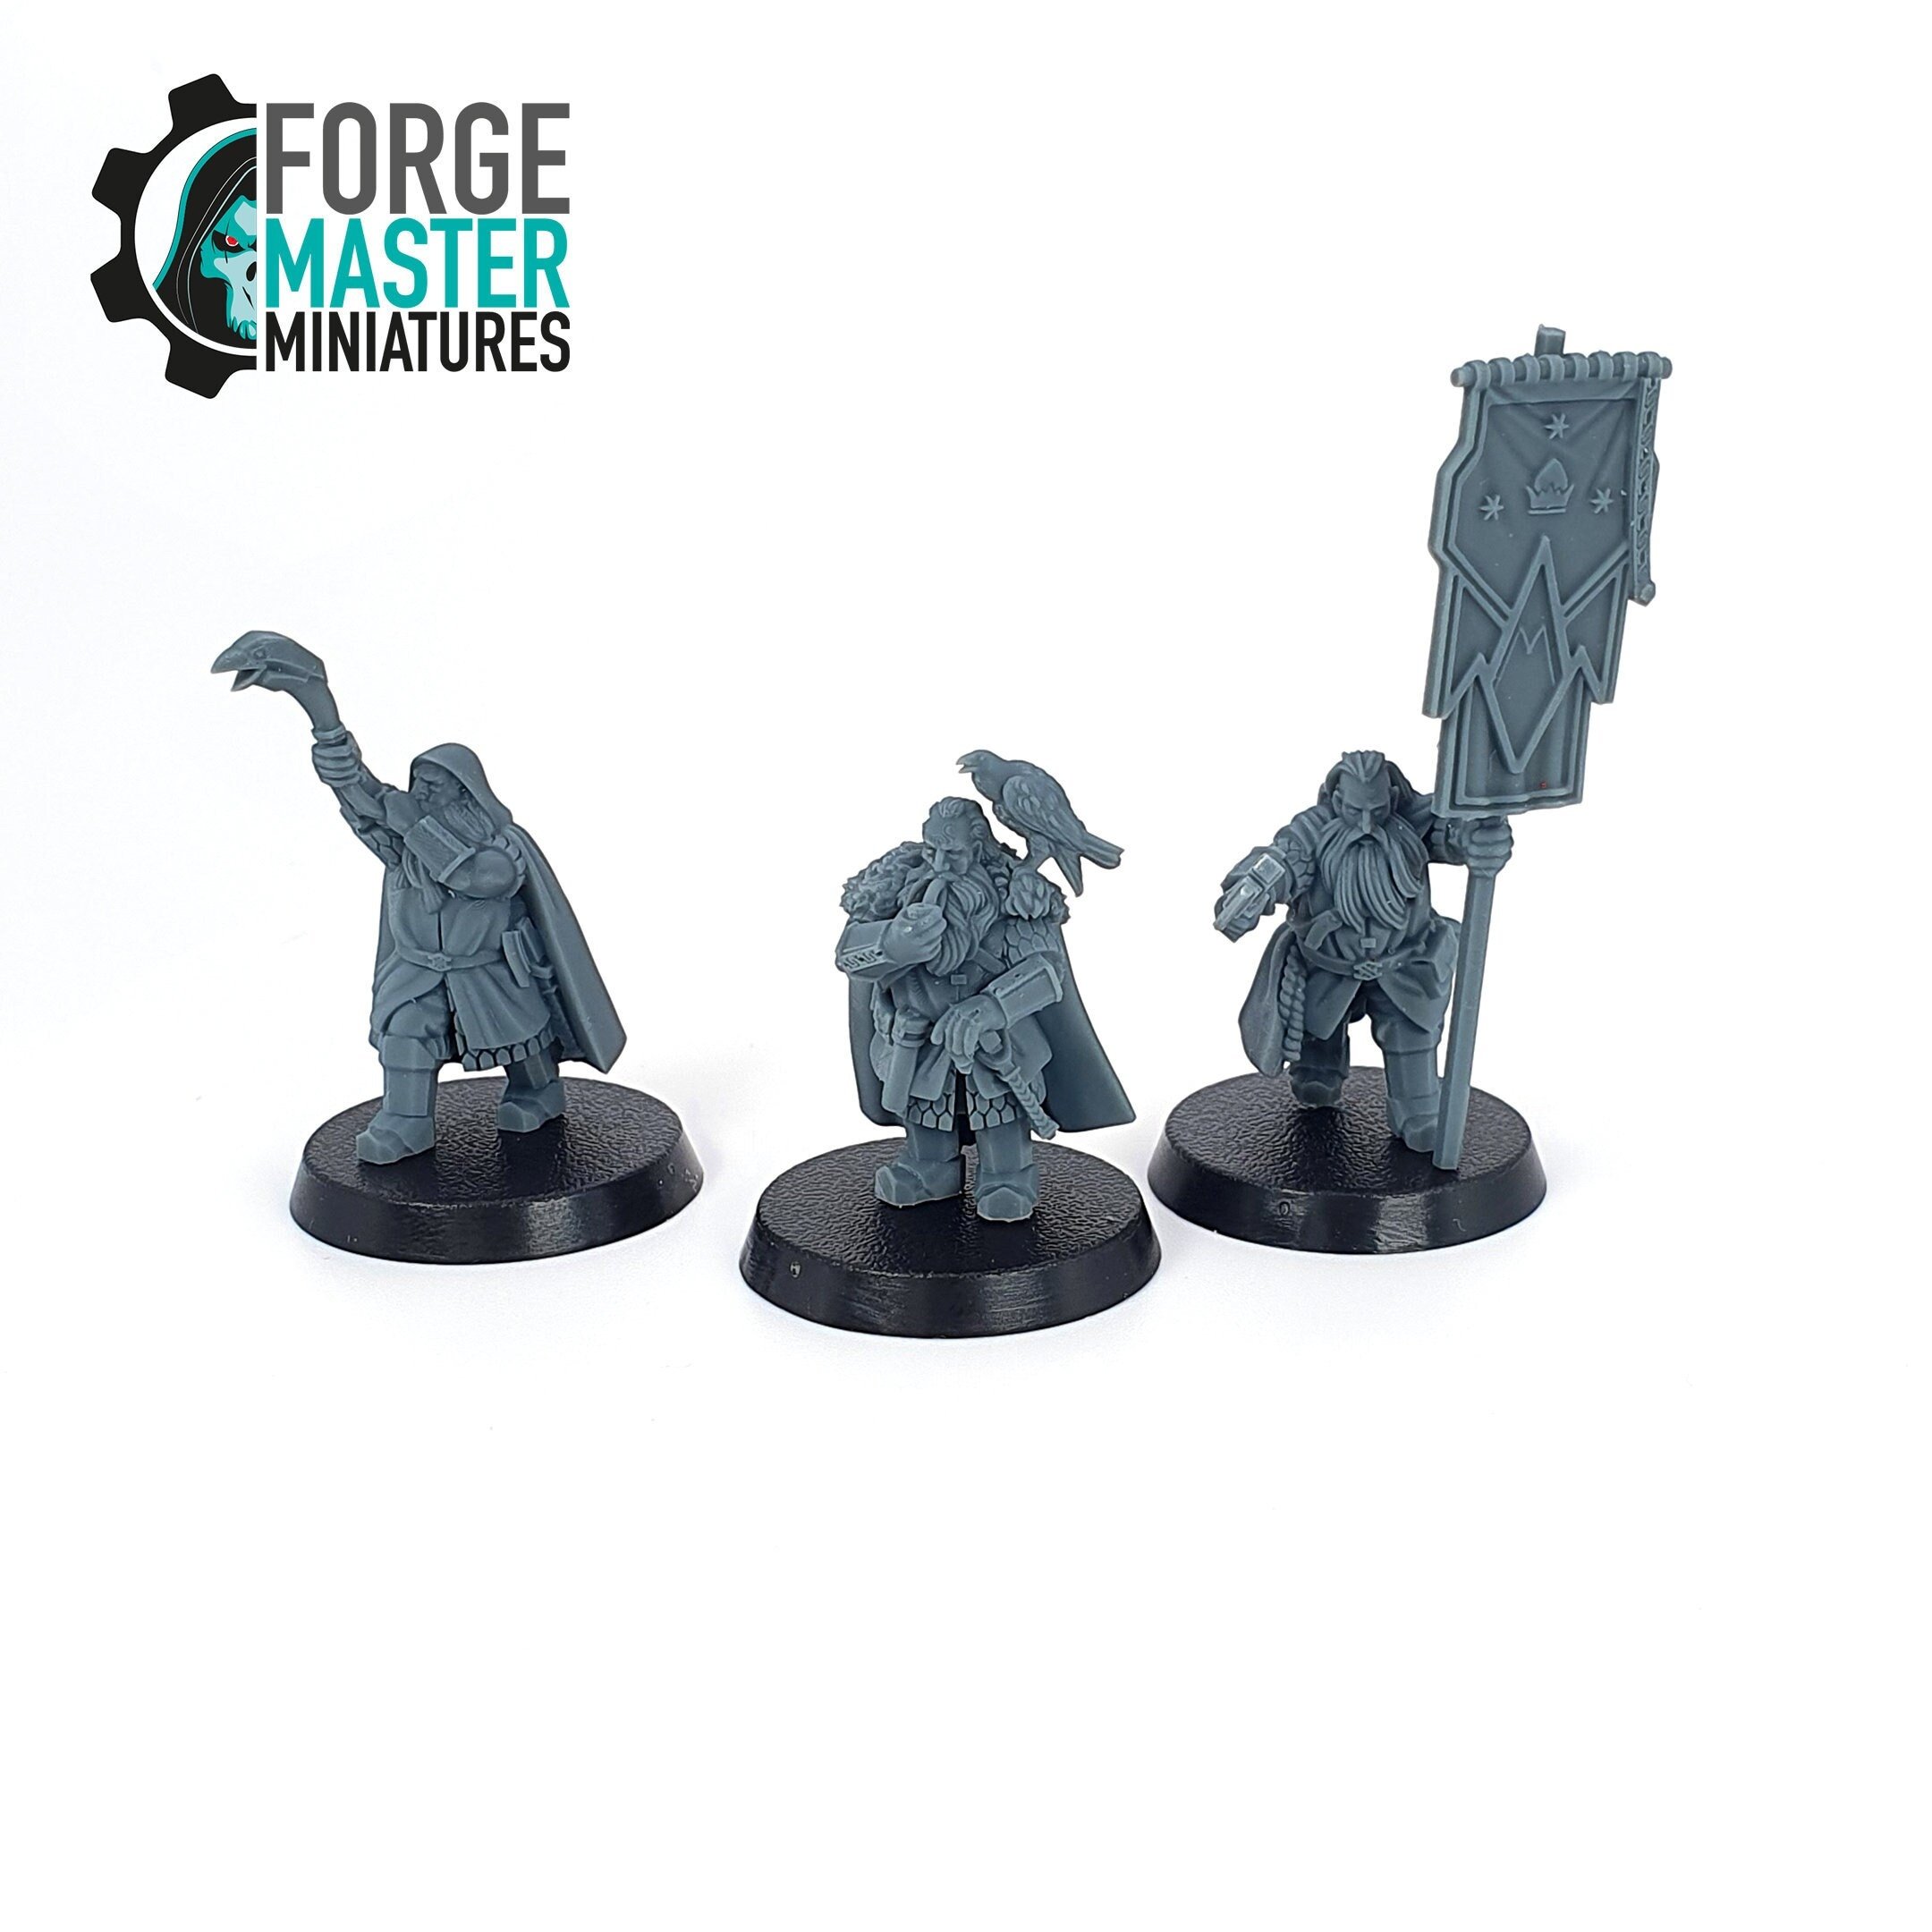 Dwarven Commanders wargaming miniatures by Unreleased Miniatures 3D Printed by Forgemaster Miniatures